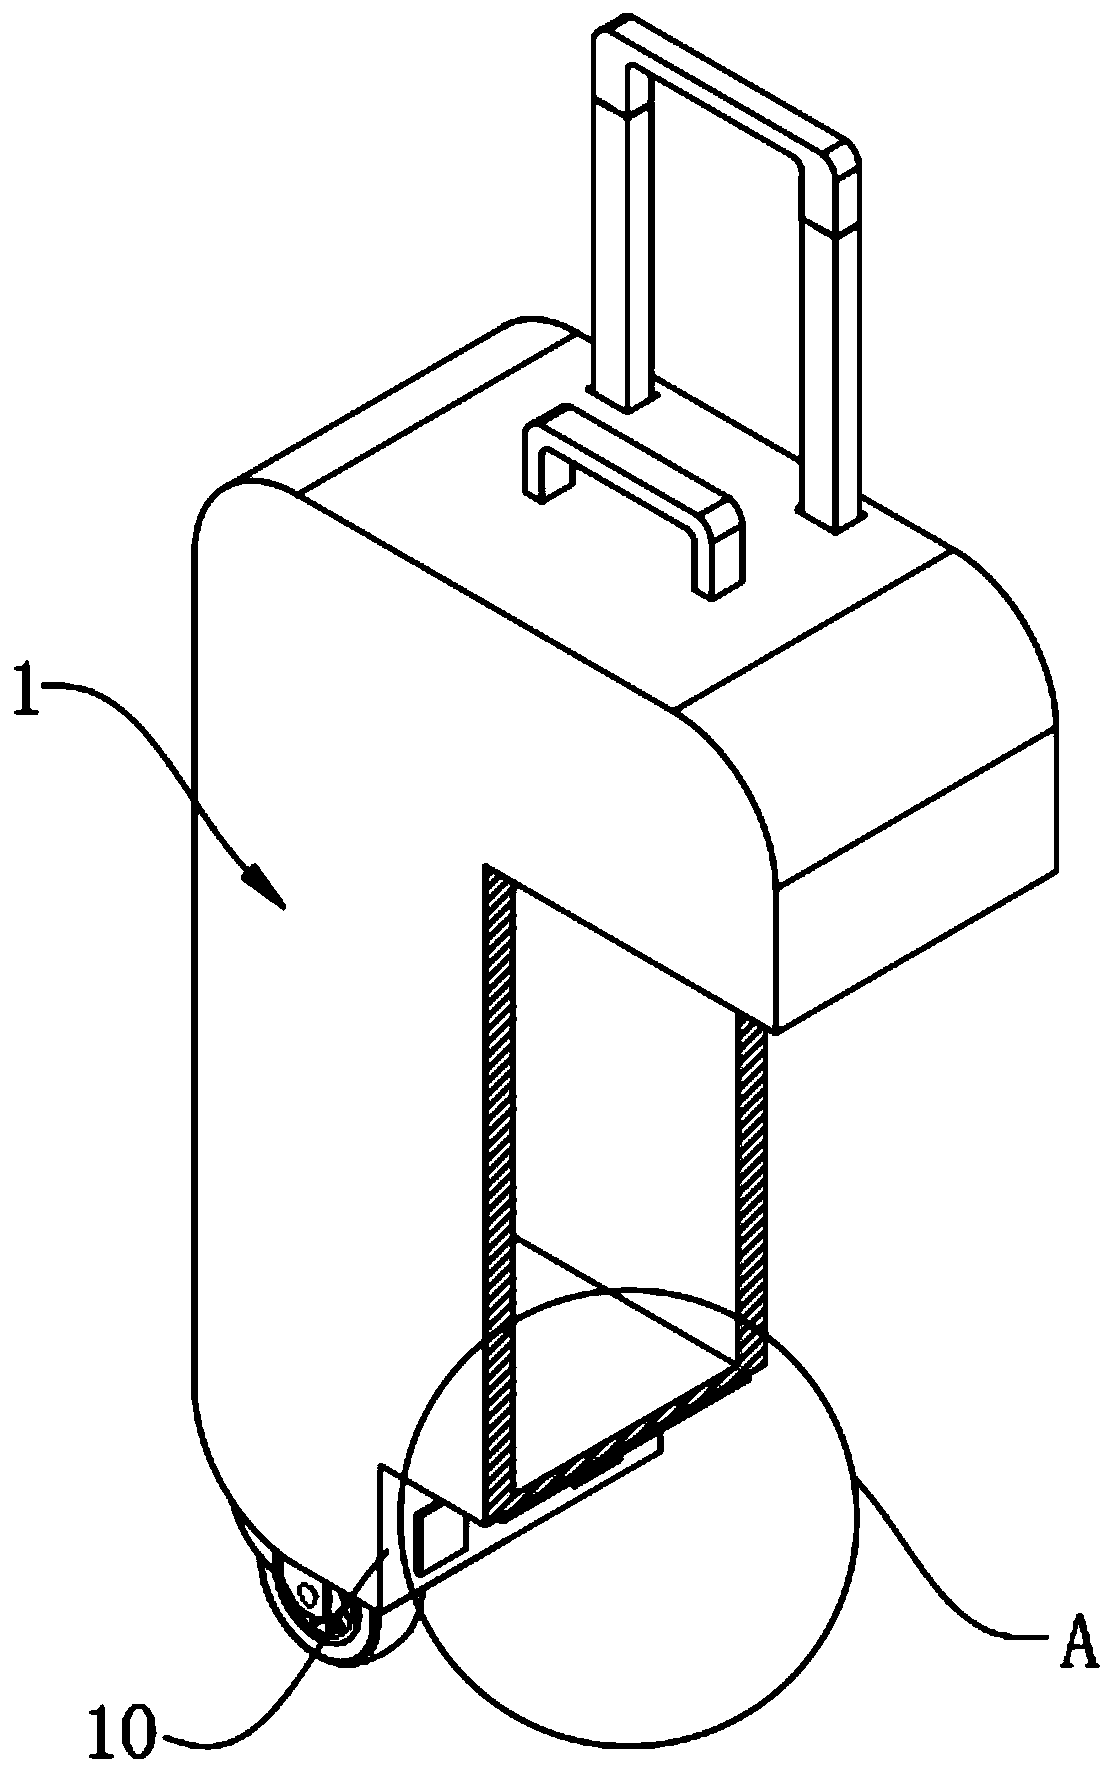 Device for rapidly cleaning hidden type trunk casters